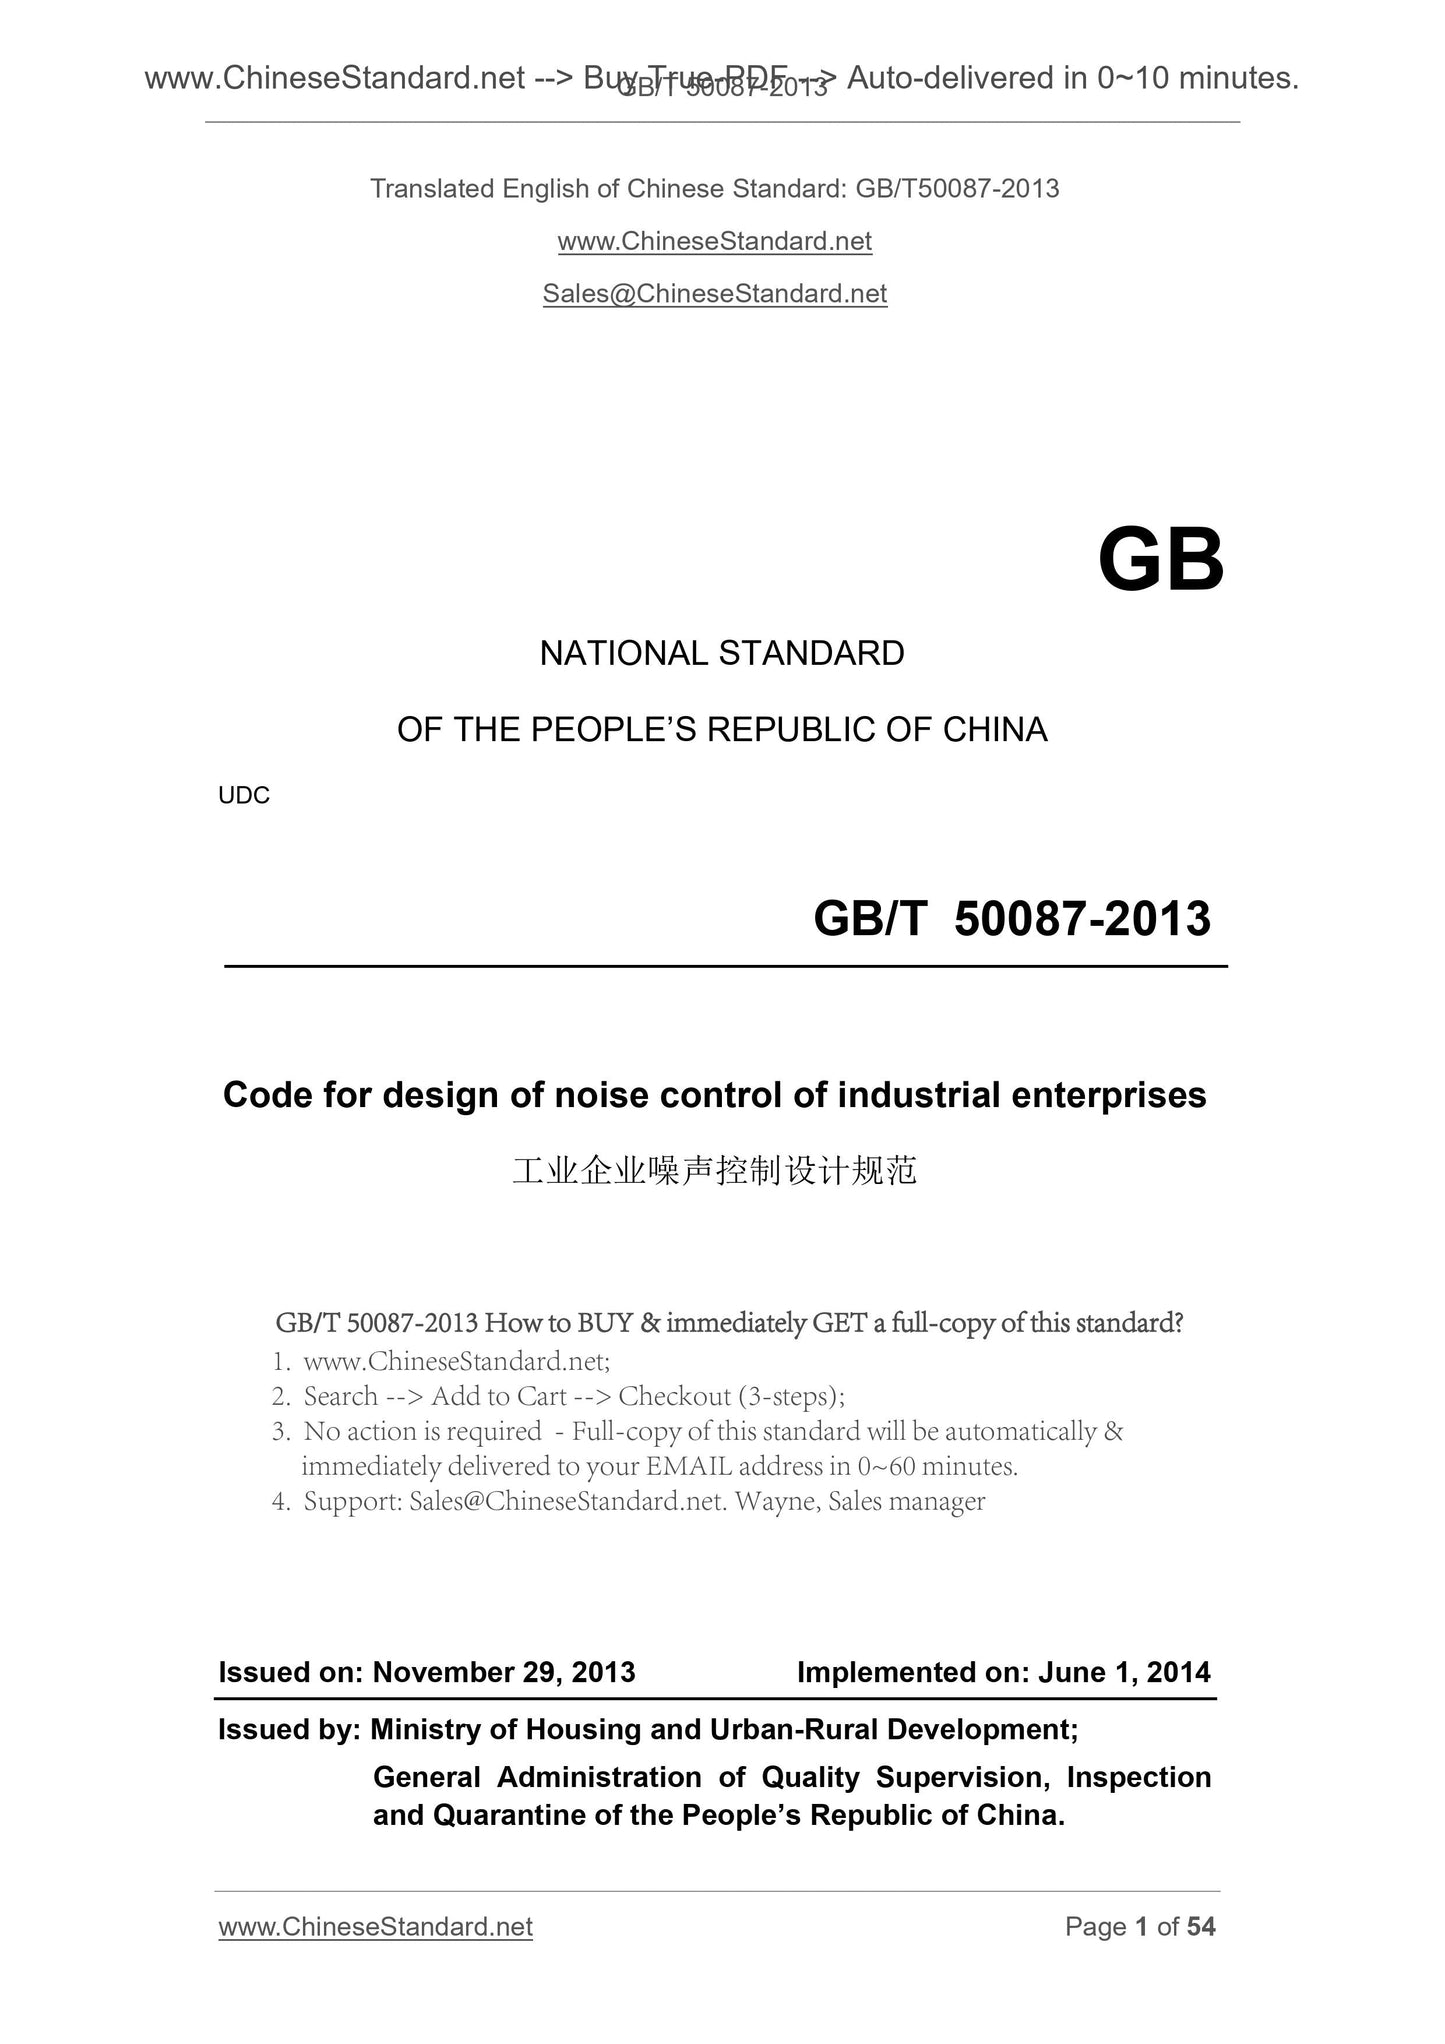 GB/T 50087-2013 Page 1